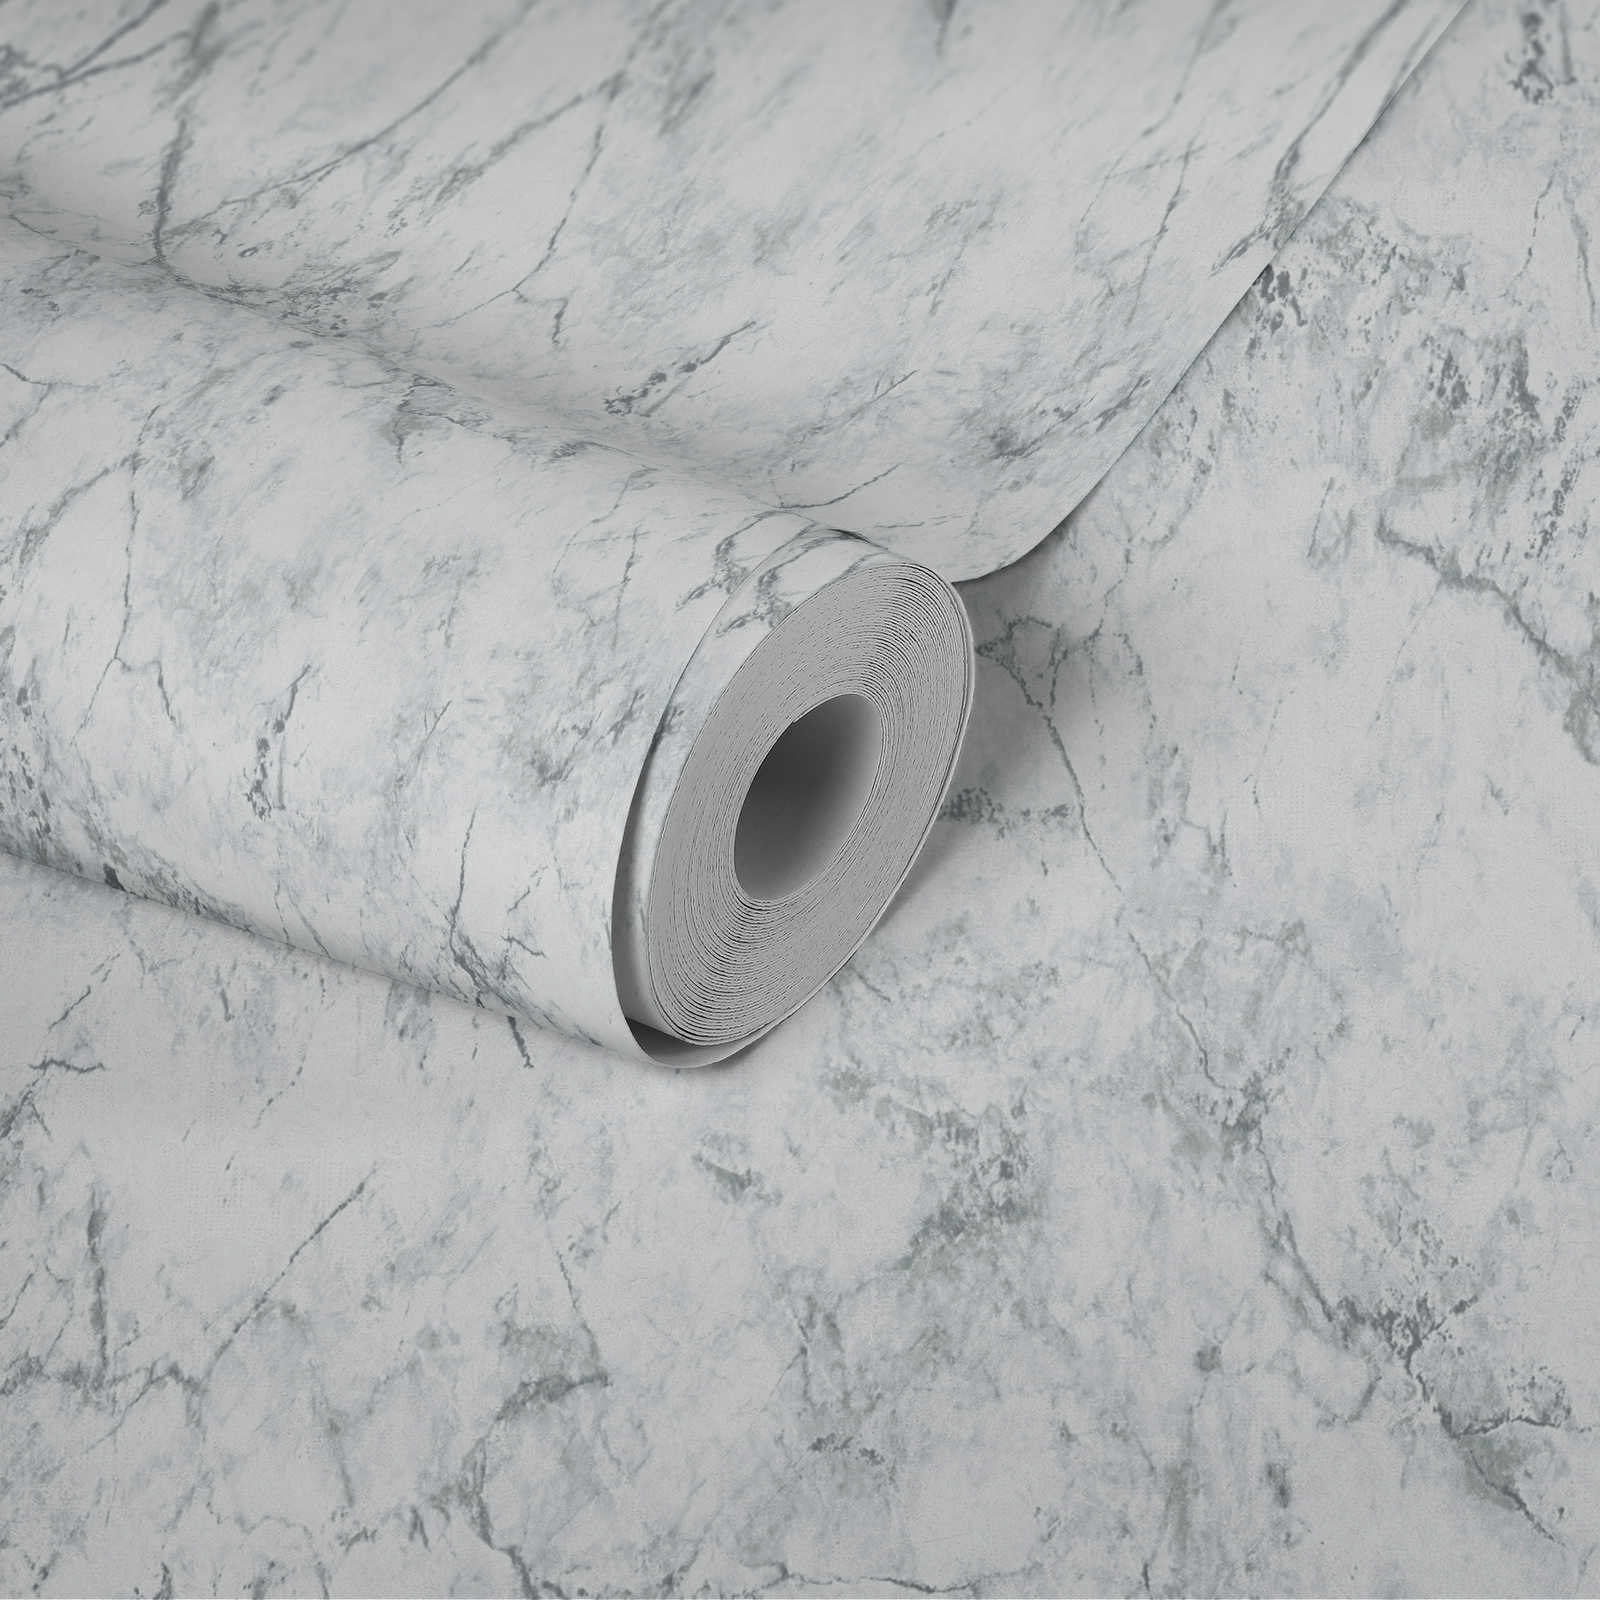             Non-woven wallpaper with fine marble look - white, grey
        